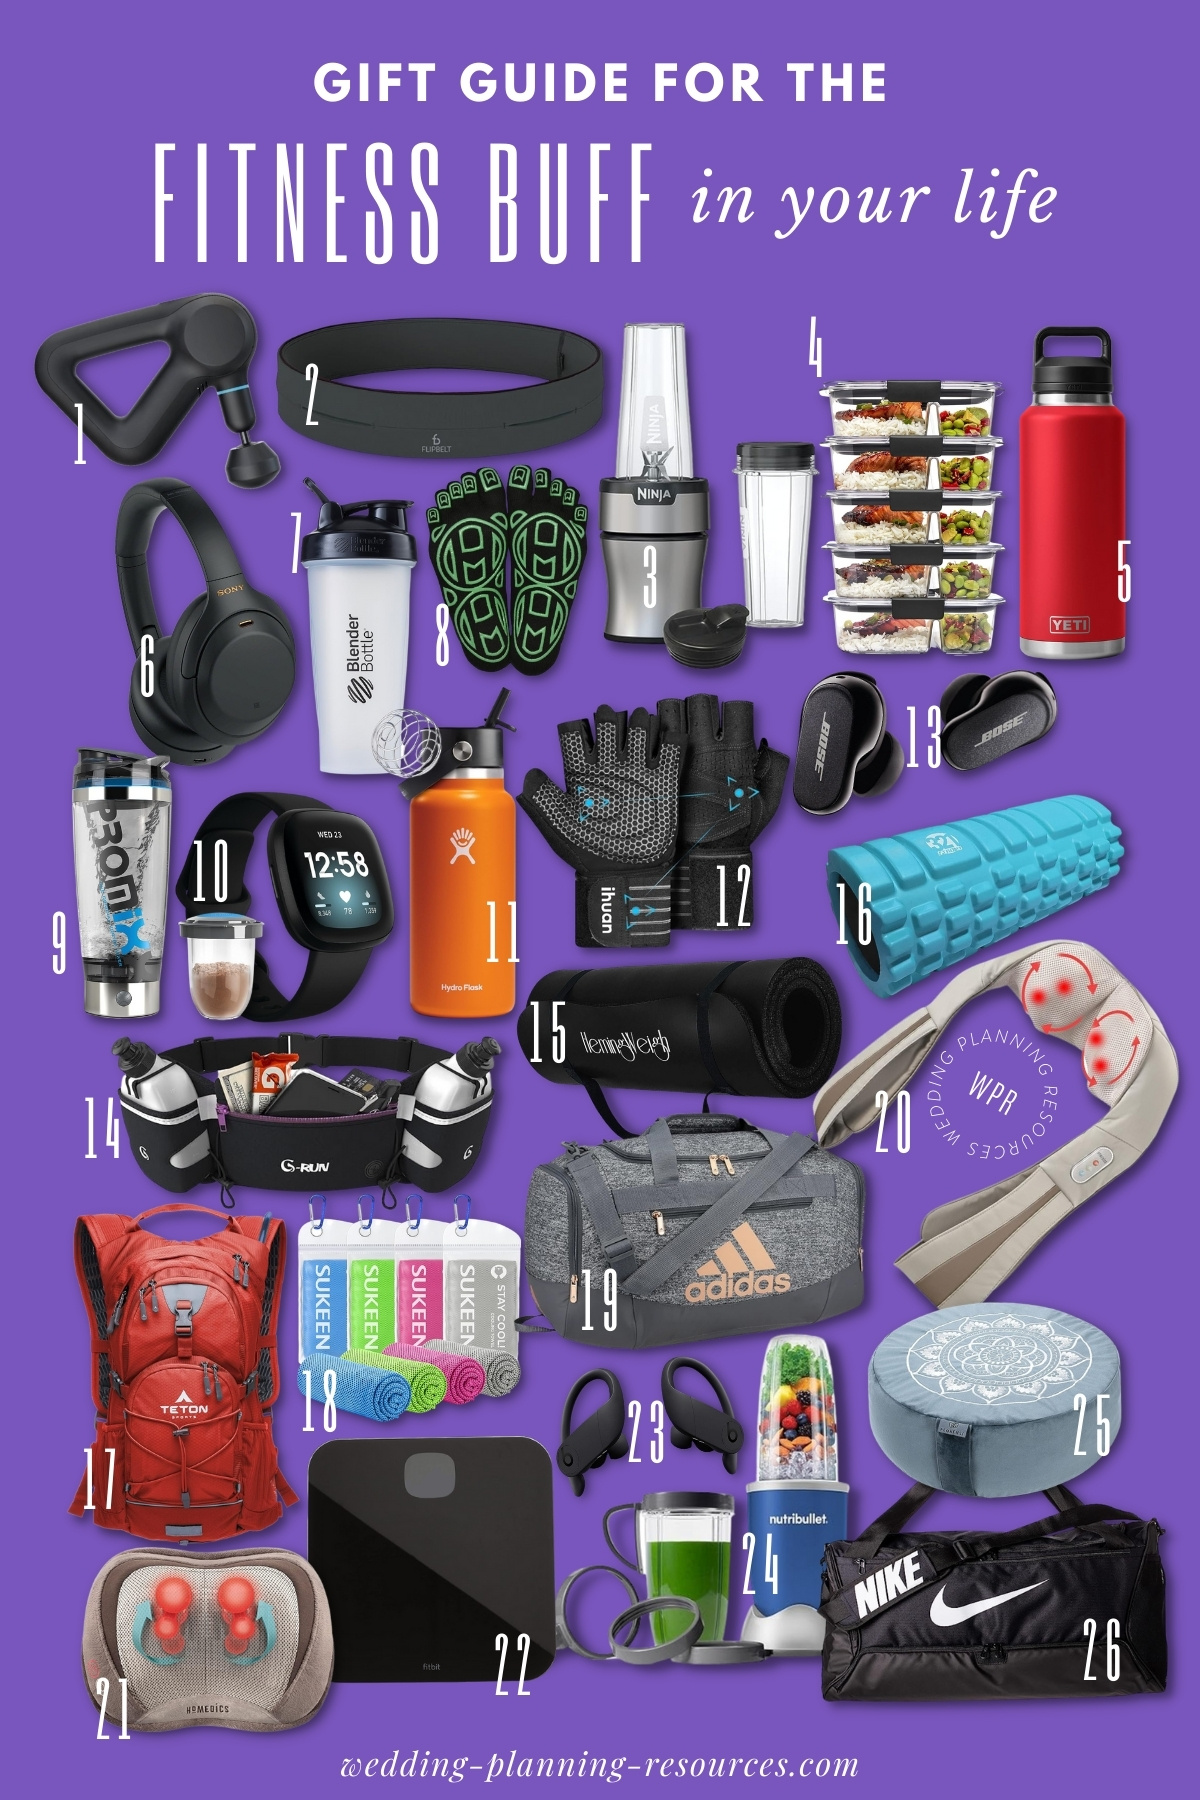 Gift Guide : Fitness Buff Gift Ideas, Sports, Active Lifestyle